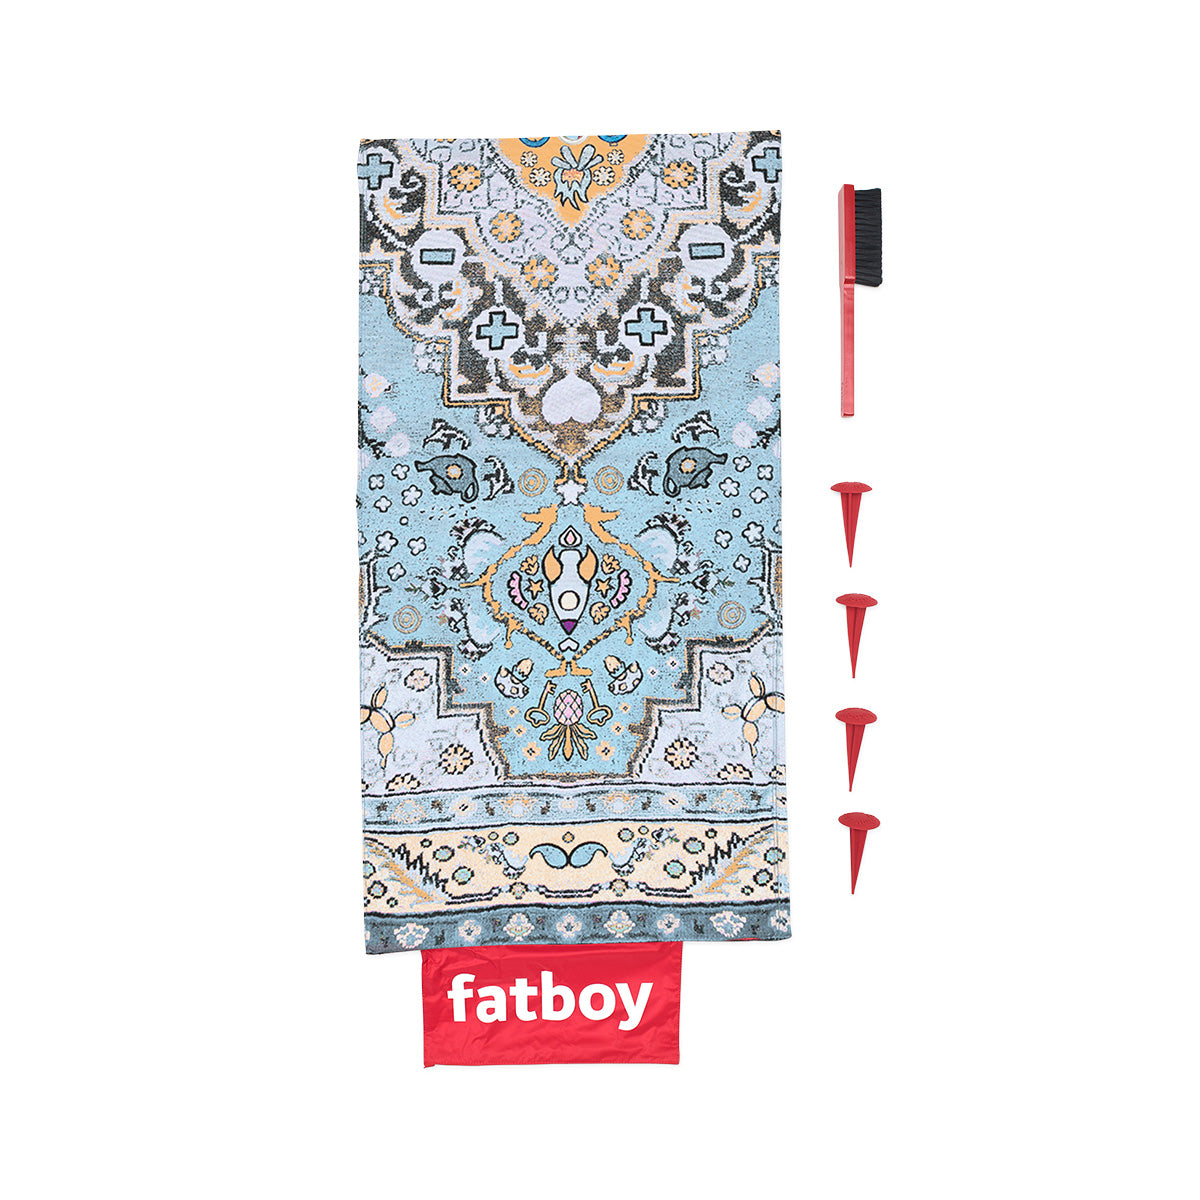 Fatboy Picnic Lounge Blanket w Pegs and Brush